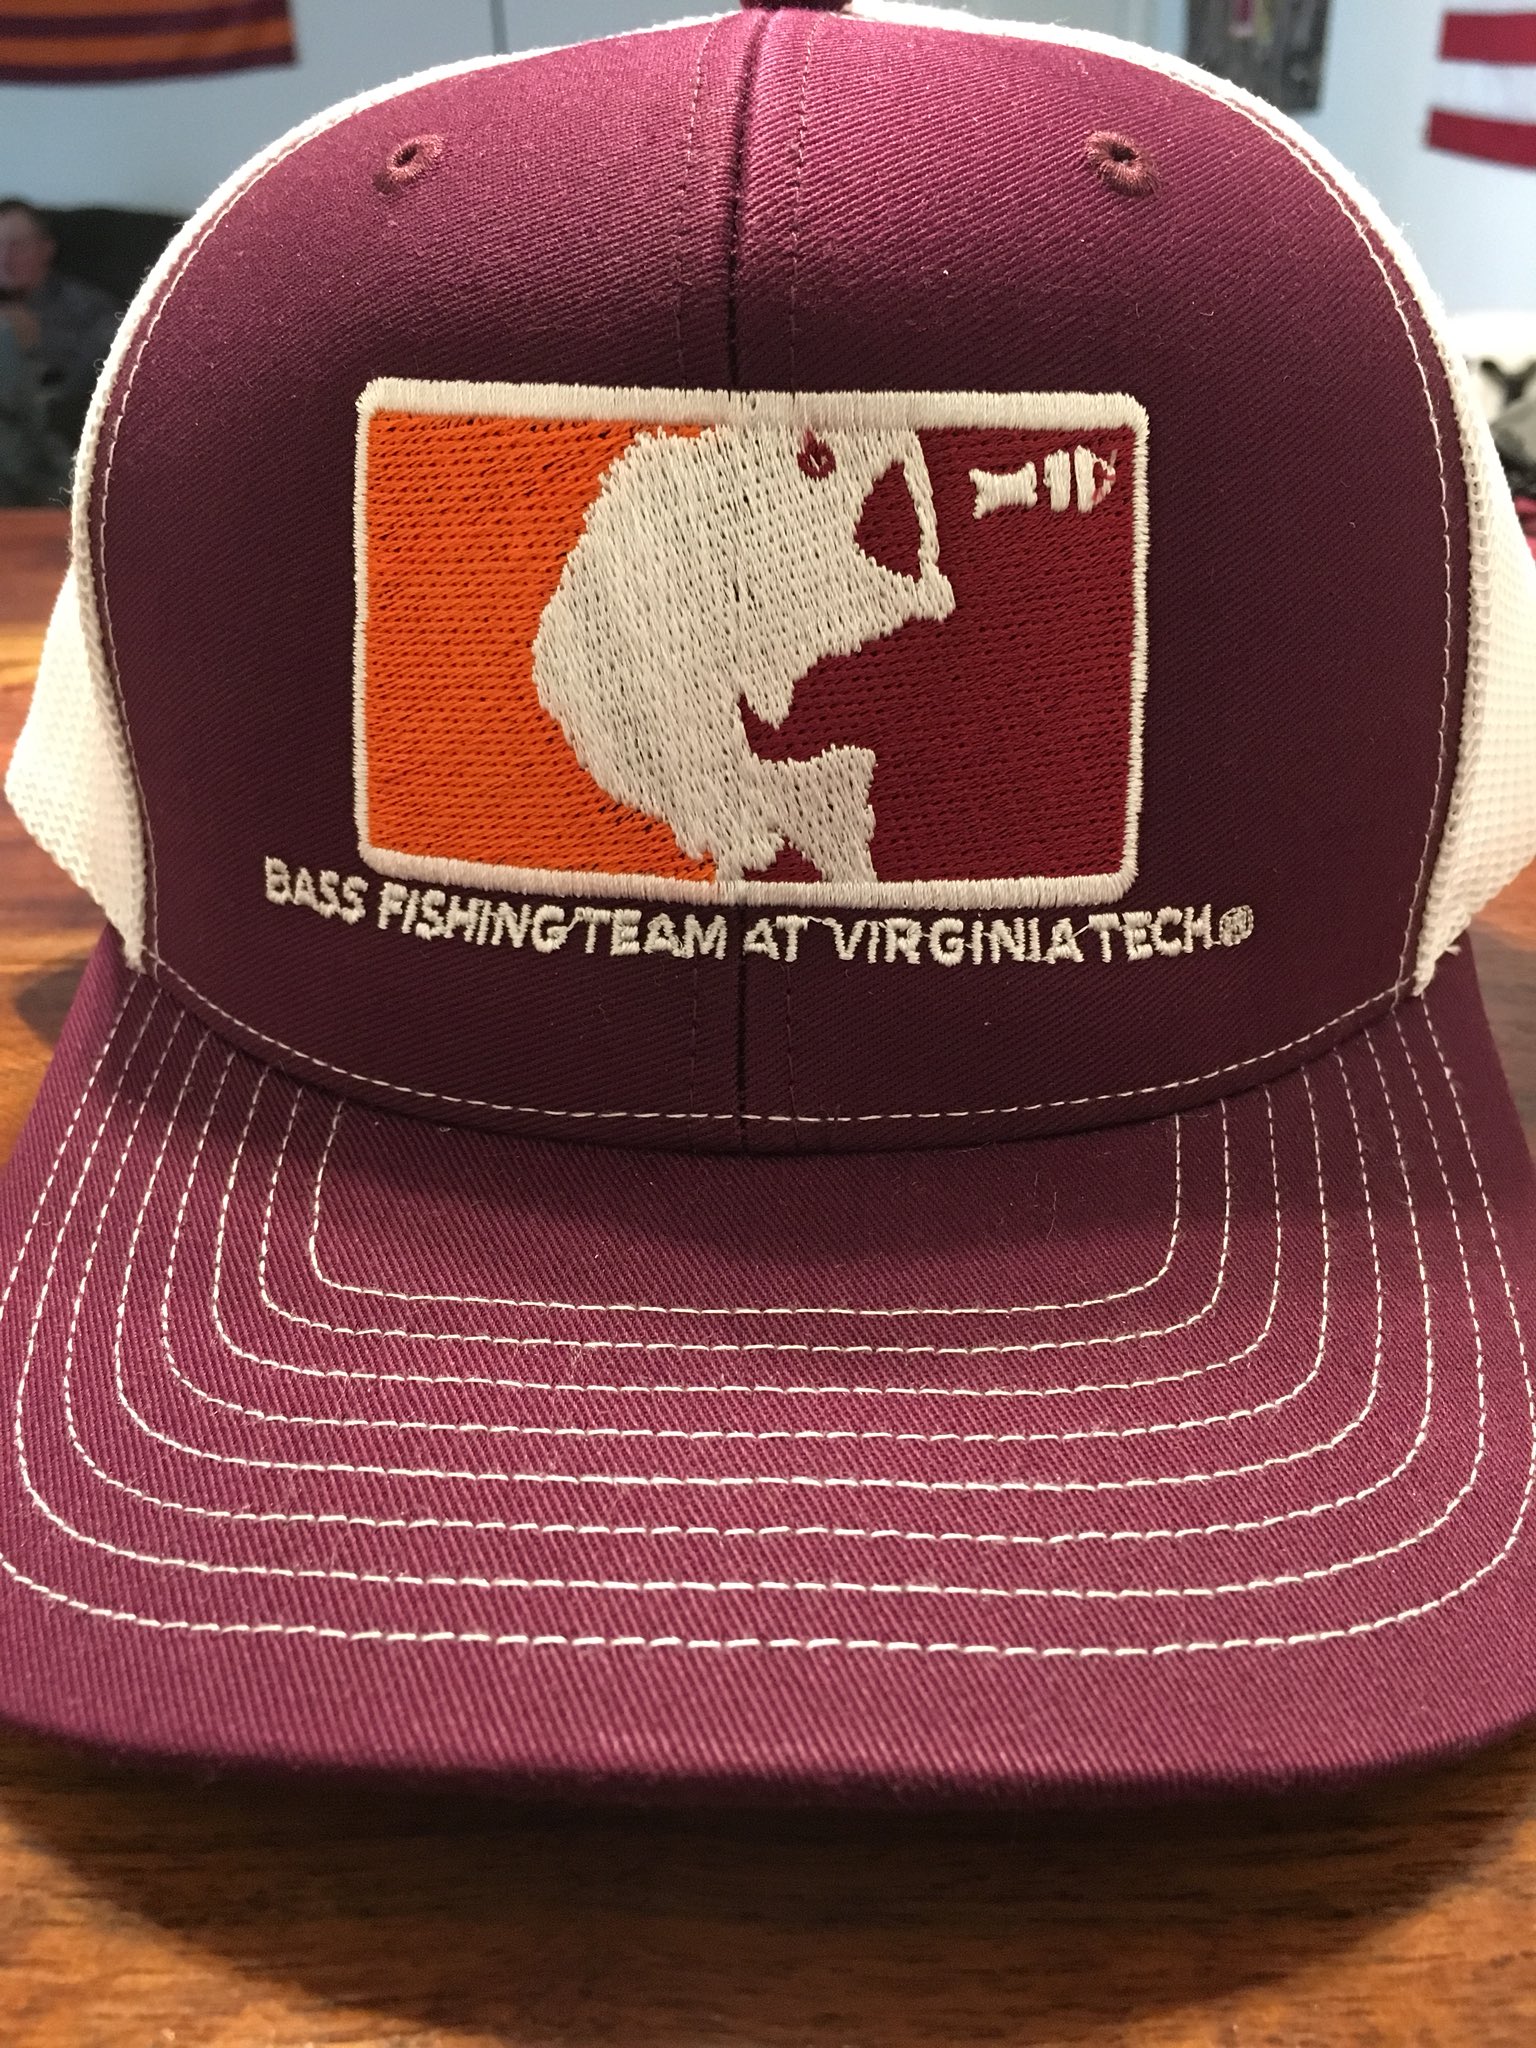 Fishing Team at VT on X: Hats are now up for sale at